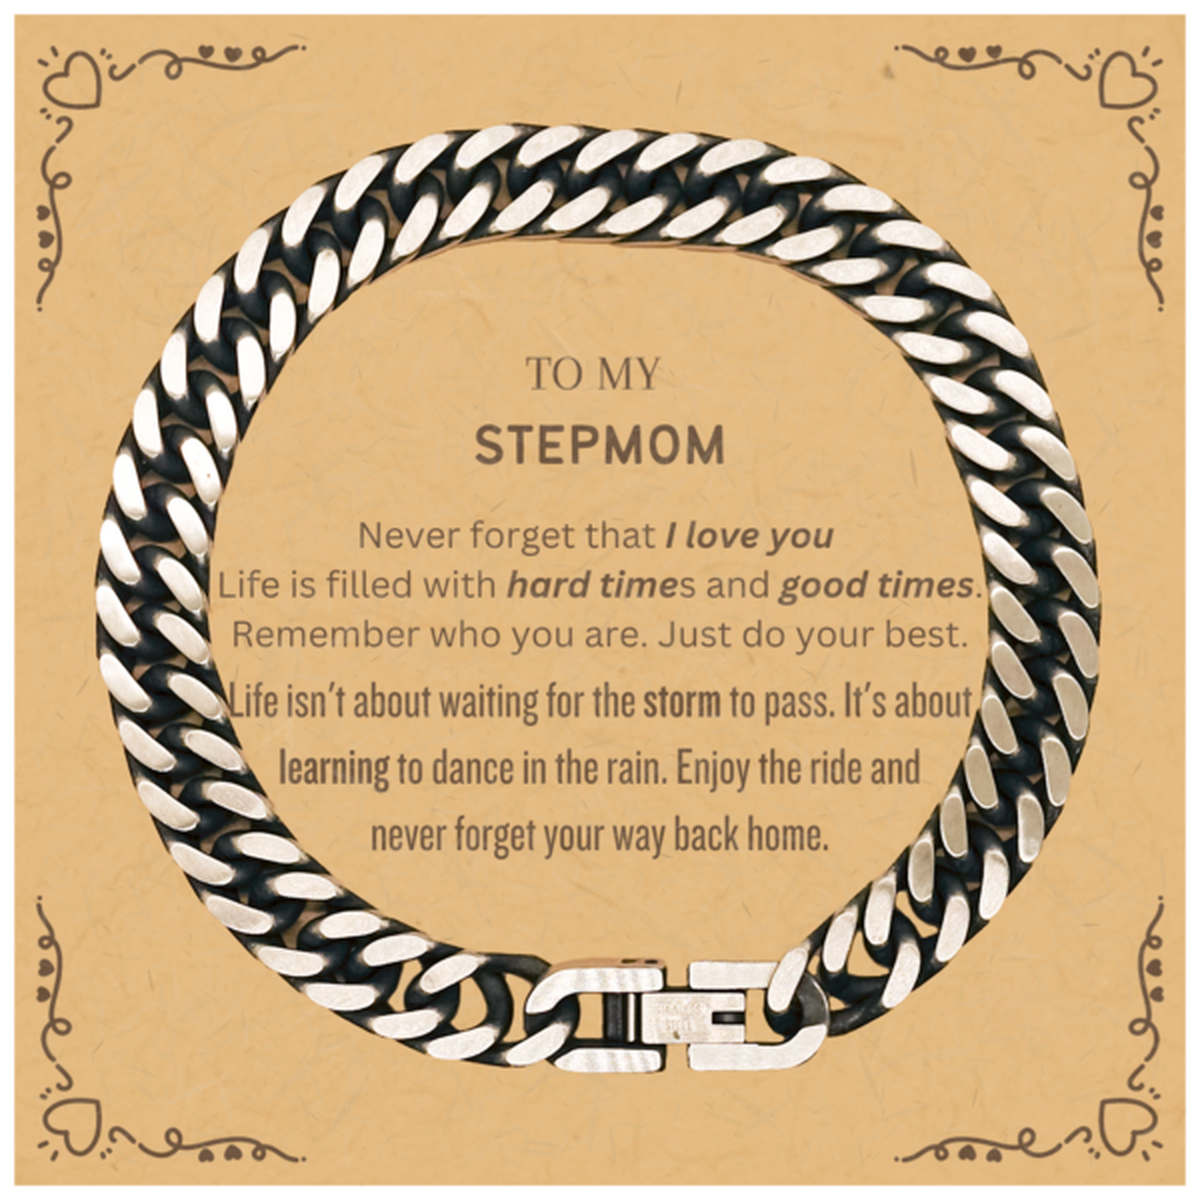 Christmas Stepmom Cuban Link Chain Bracelet Gifts, To My Stepmom Birthday Thank You Gifts For Stepmom, Graduation Unique Gifts For Stepmom To My Stepmom Never forget that I love you life is filled with hard times and good times. Remember who you are. Just